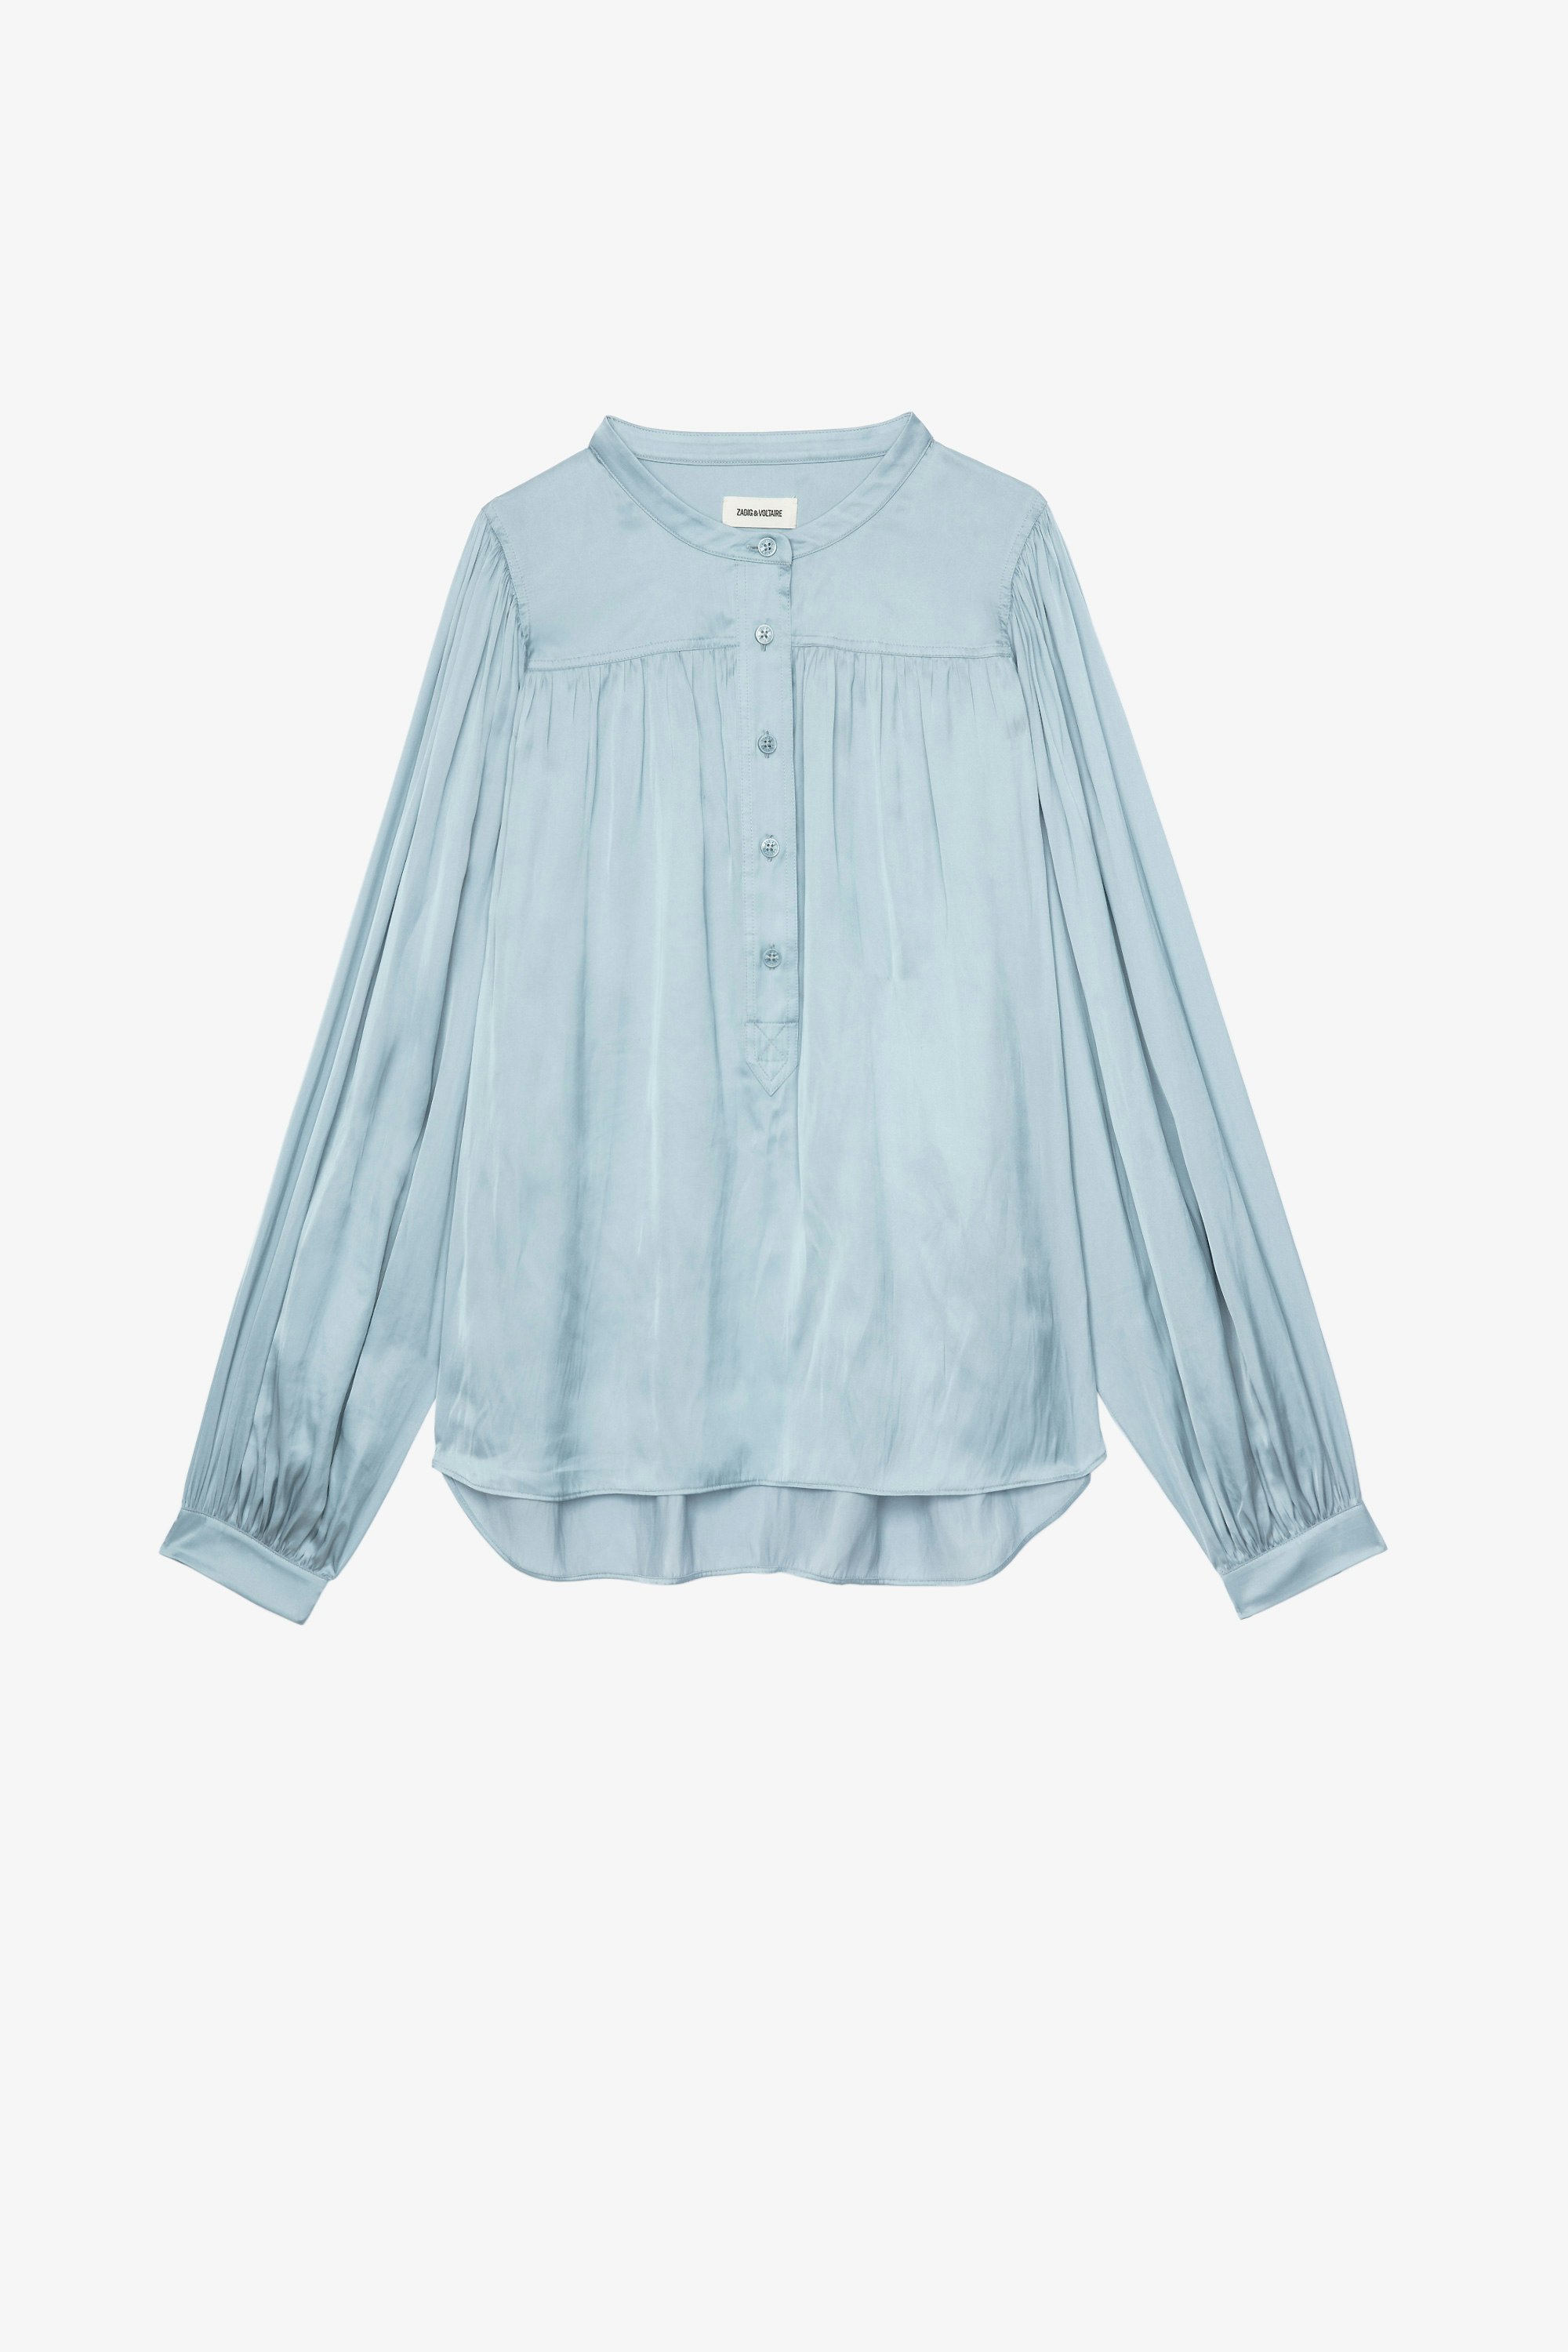 Tigy Blouse Satin Sky blue satiny blouse with long puff sleeves 